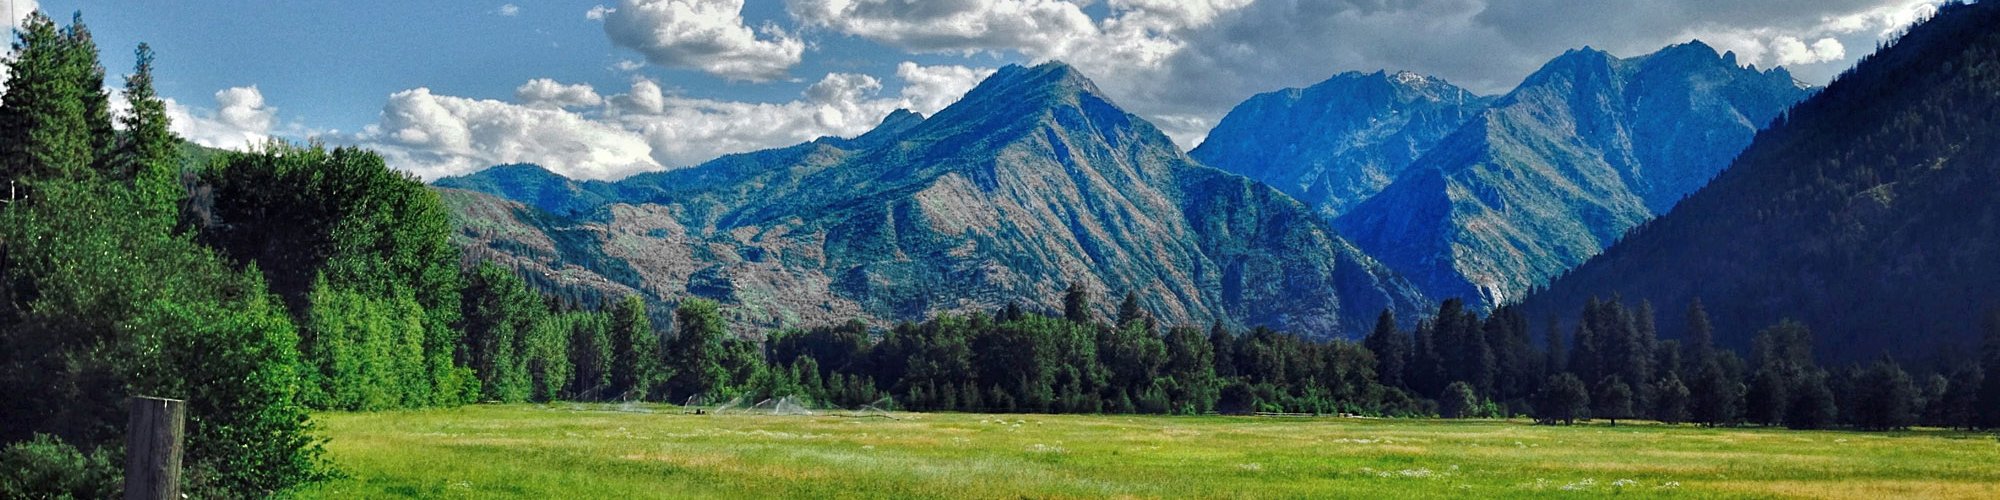 A view of Wedge Mountain from Fromm's Field in Leavenworth.